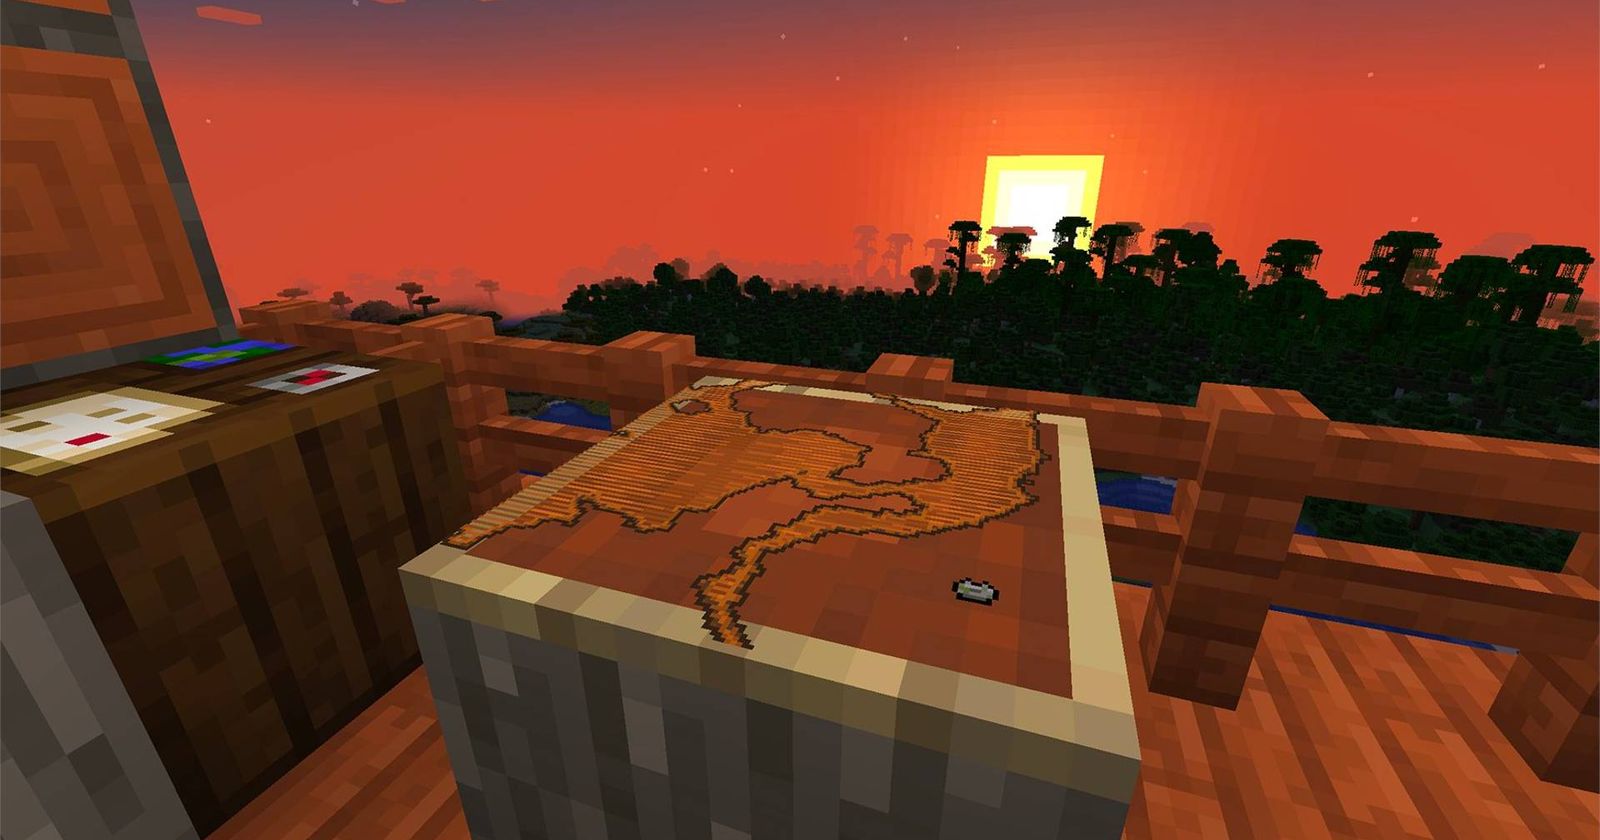 Minecraft: How to Migrate Your Account